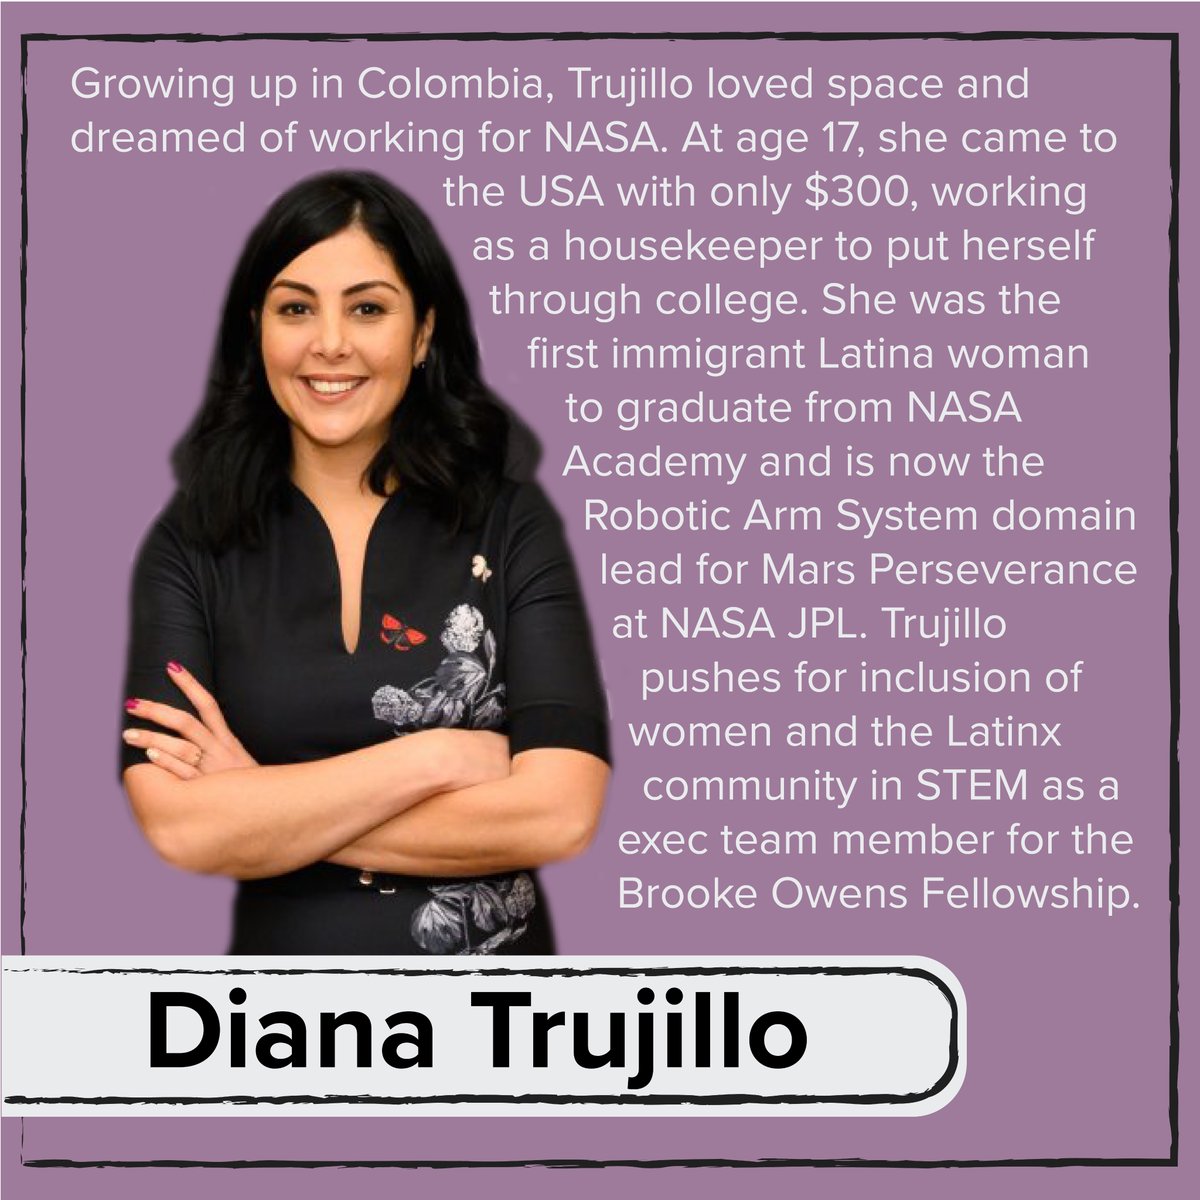  @FromCaliToMars emigrated from Colombia to the US at age 17. She worked diligently to put herself through school & pursue her dream of working at NASA. She now works  @NASAJPL as the Robotic Arm System domain lead for Mars Perseverance & is an exec team member for  @owensfellowship